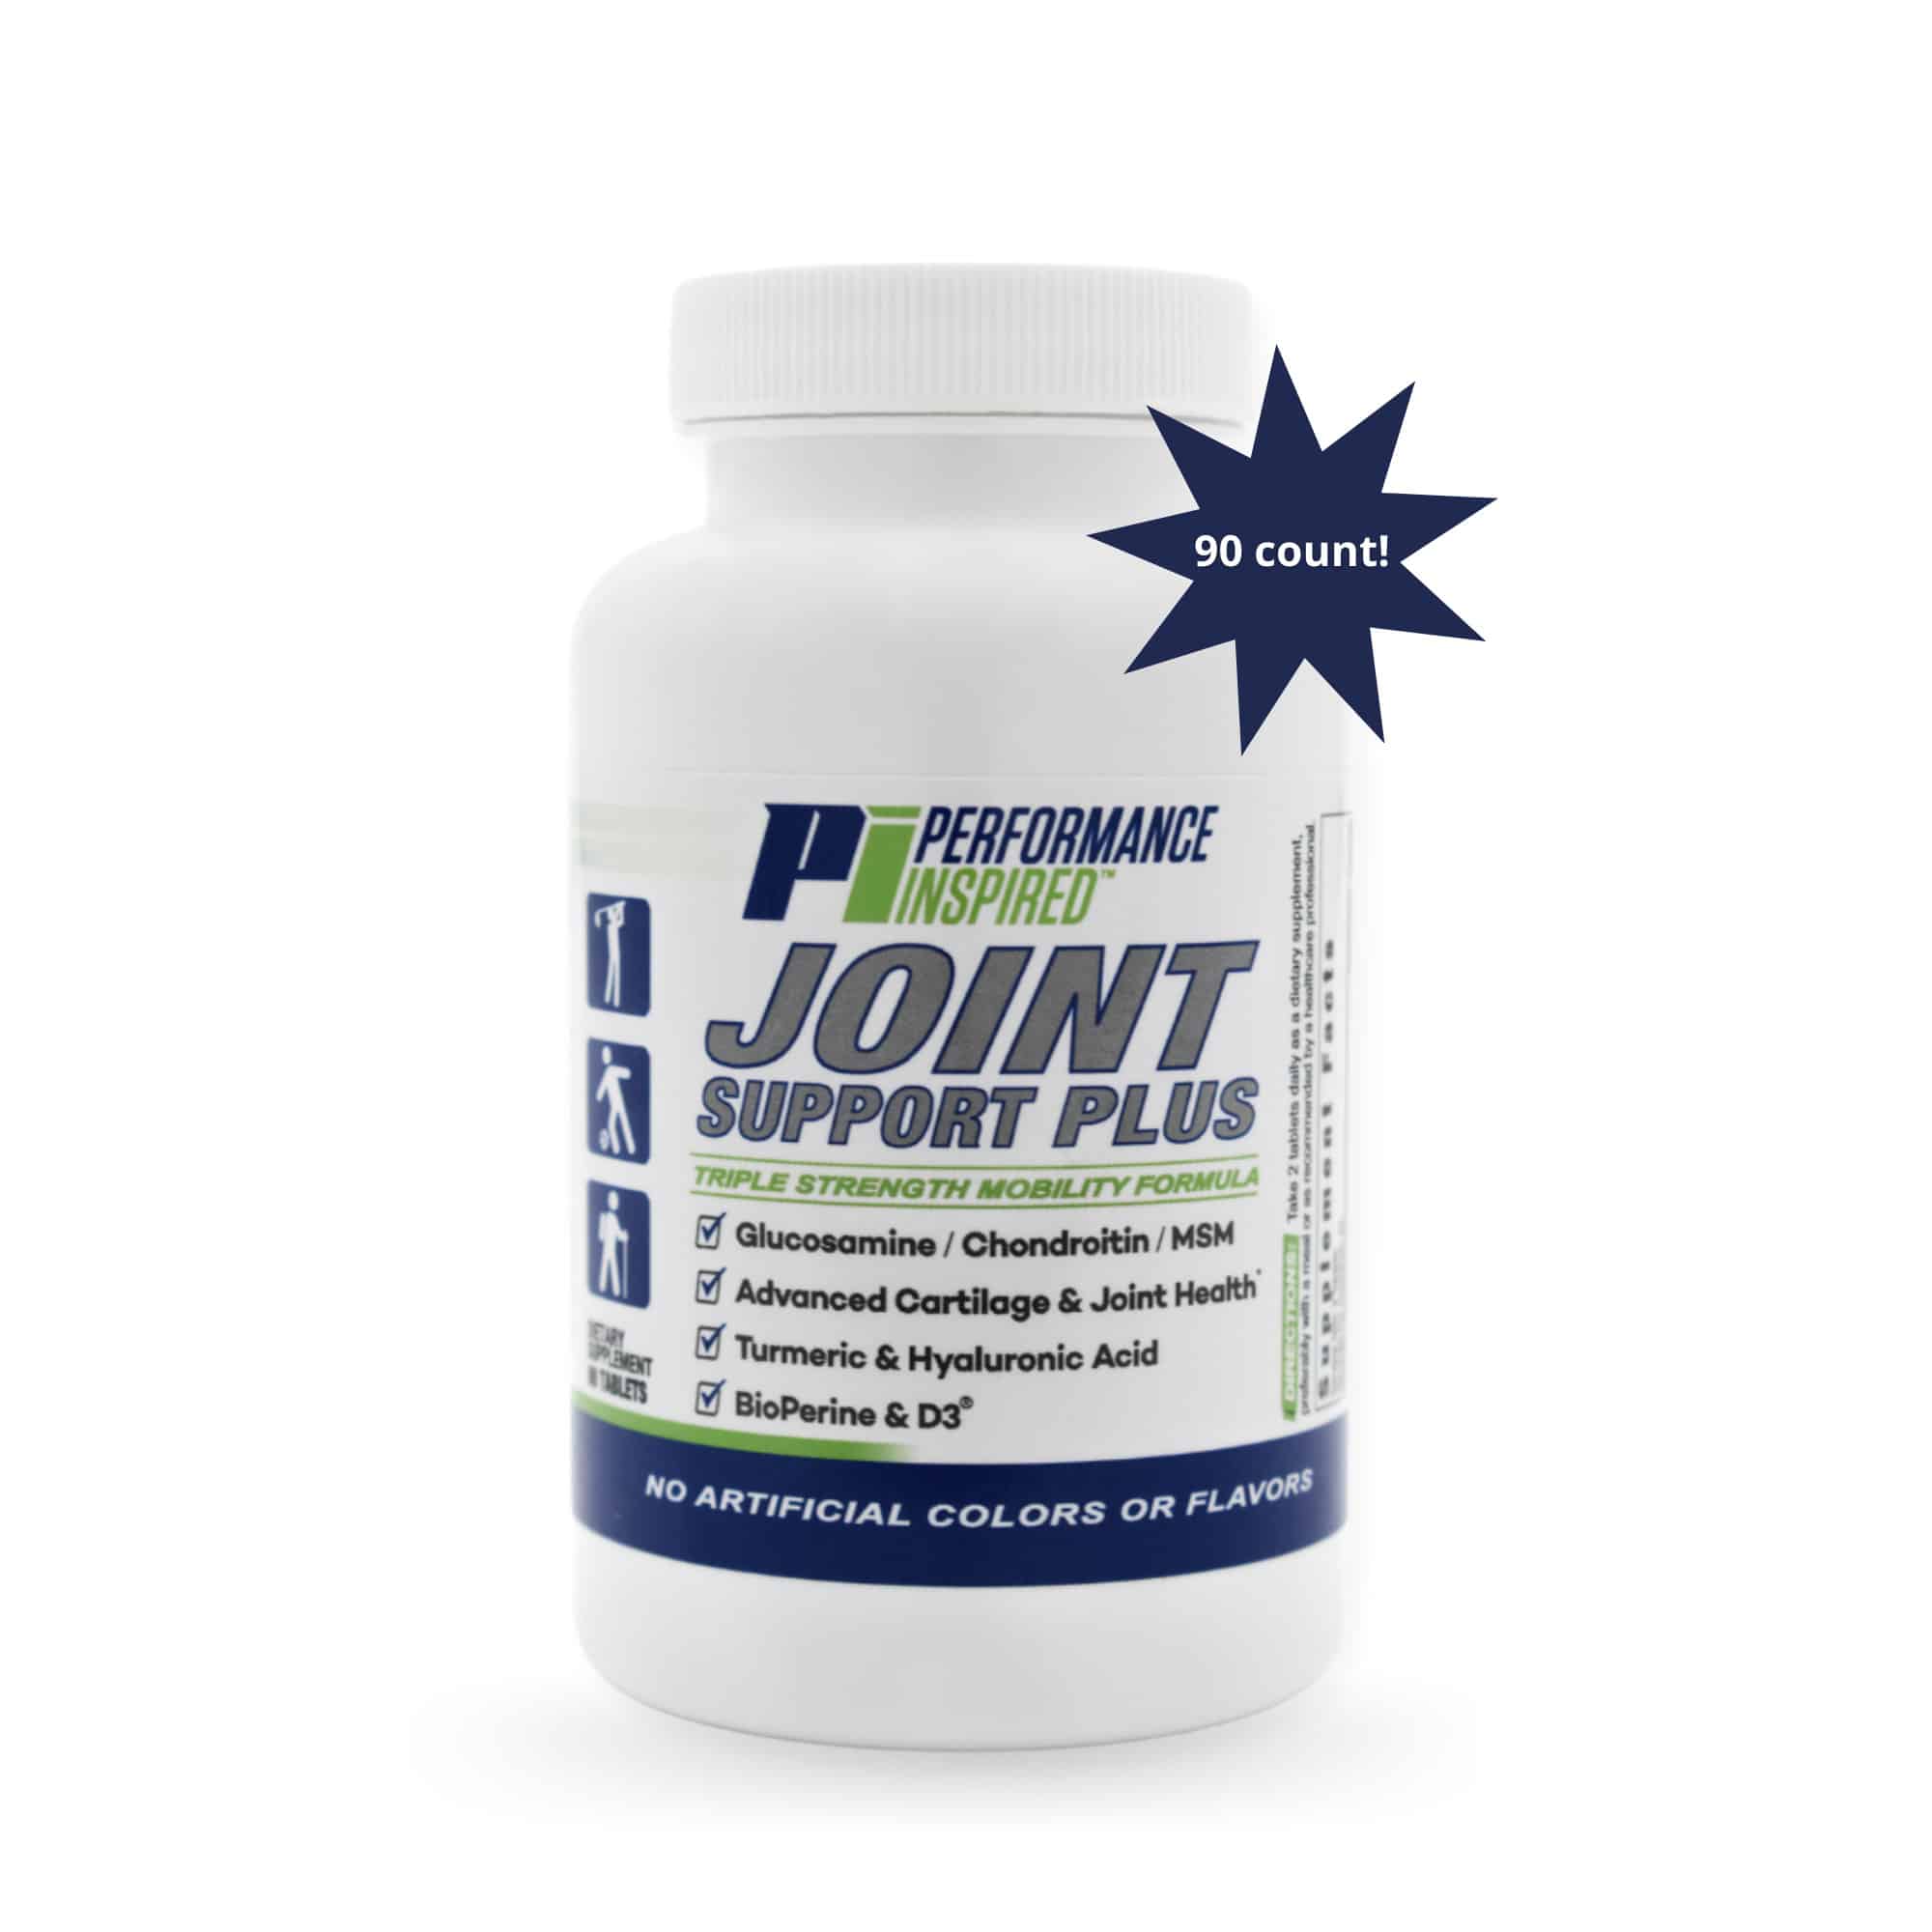 Joint strength support